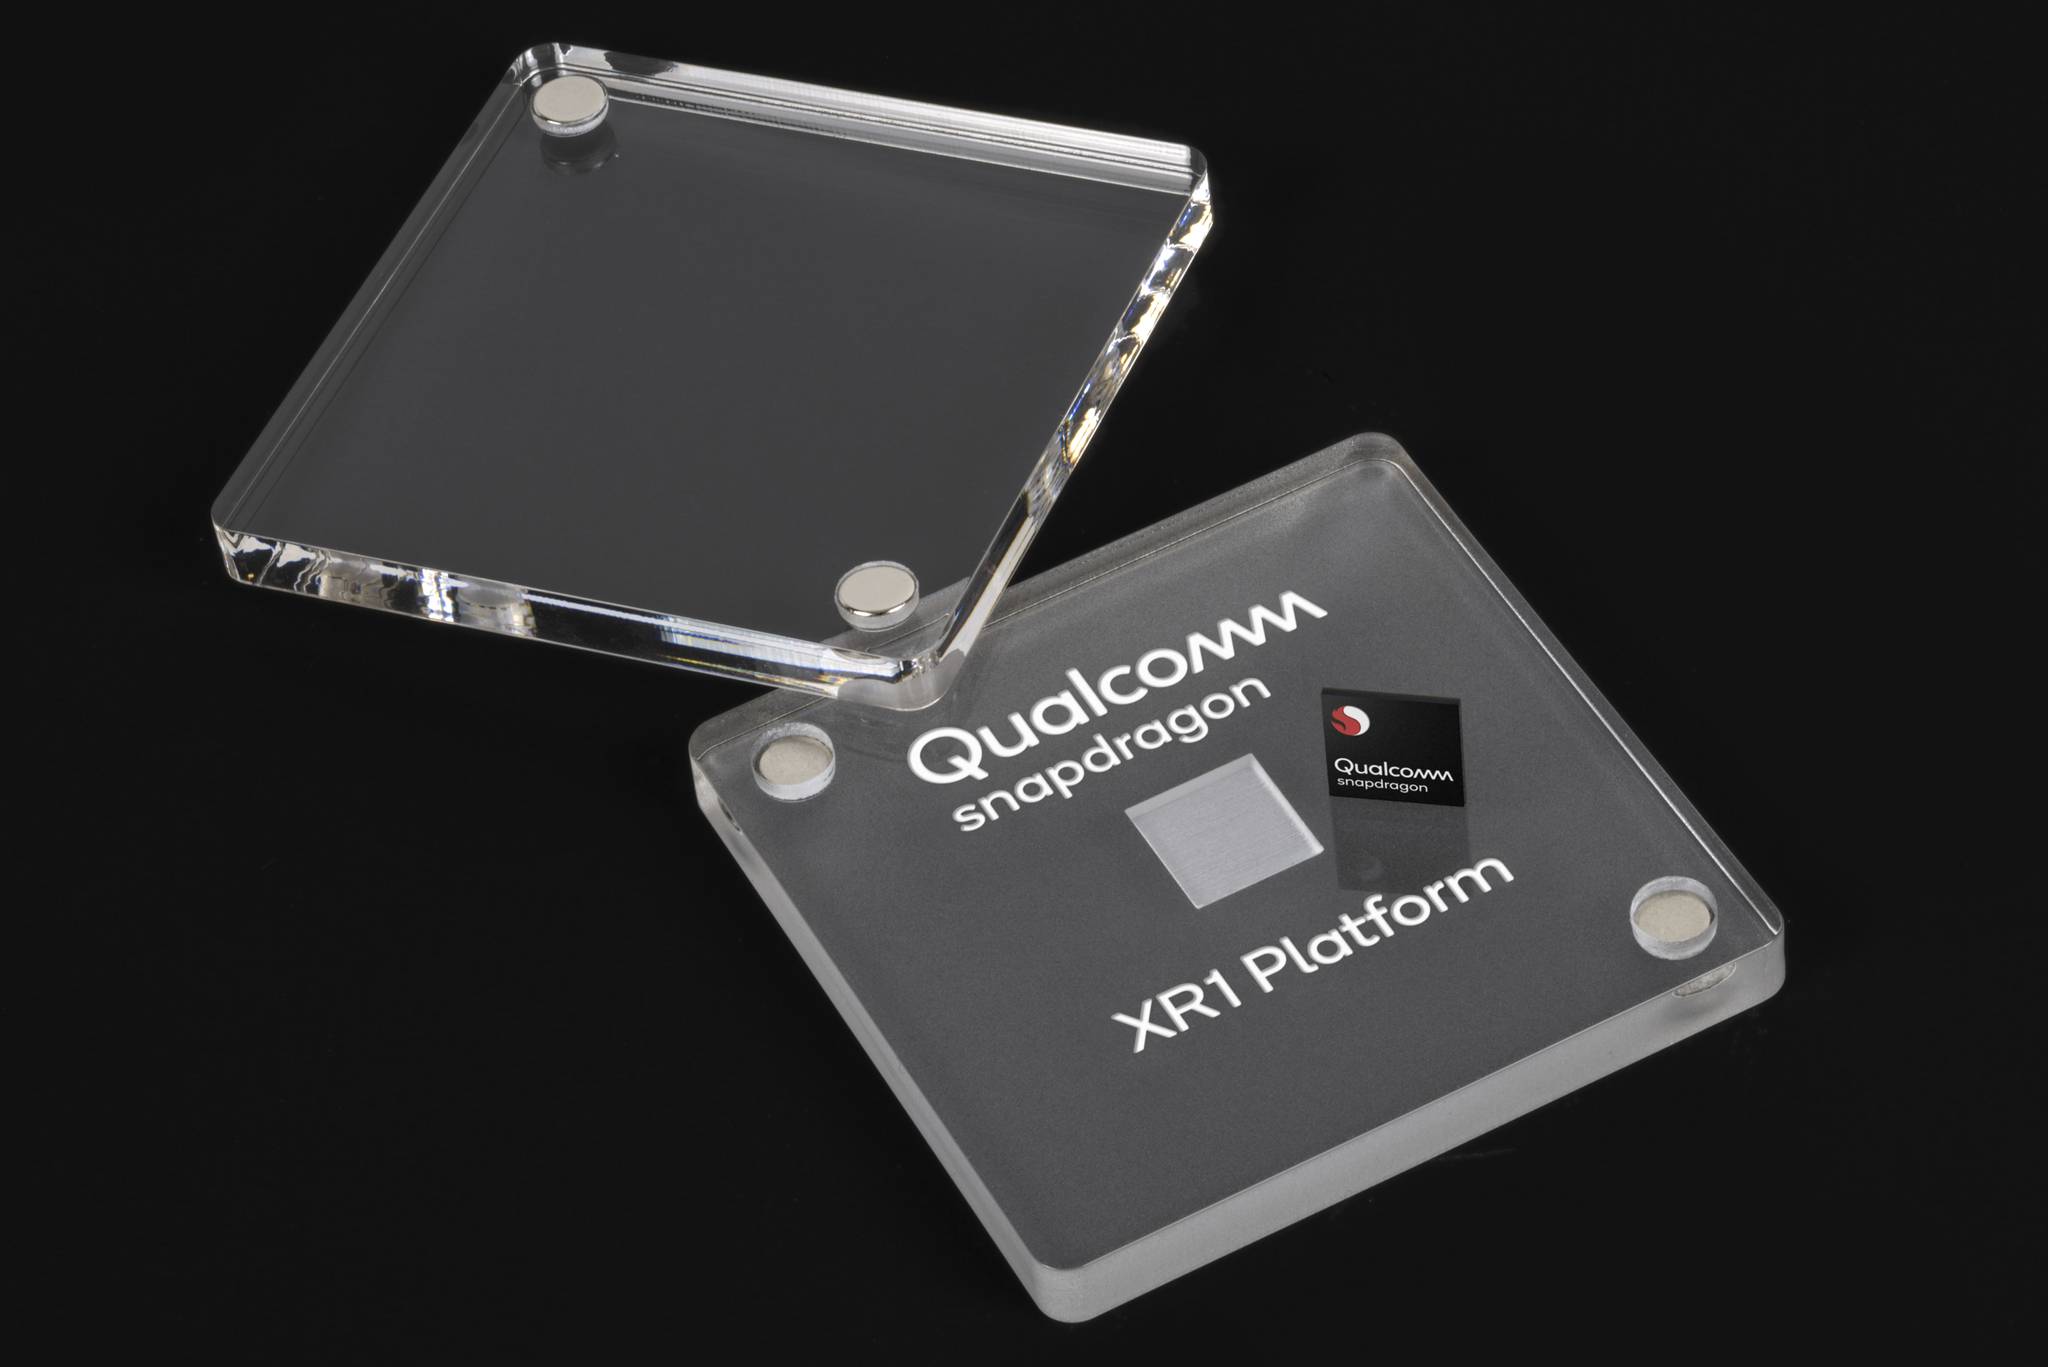 New XR1 chip from Qualcomm starts path to dedicated VR/AR processing